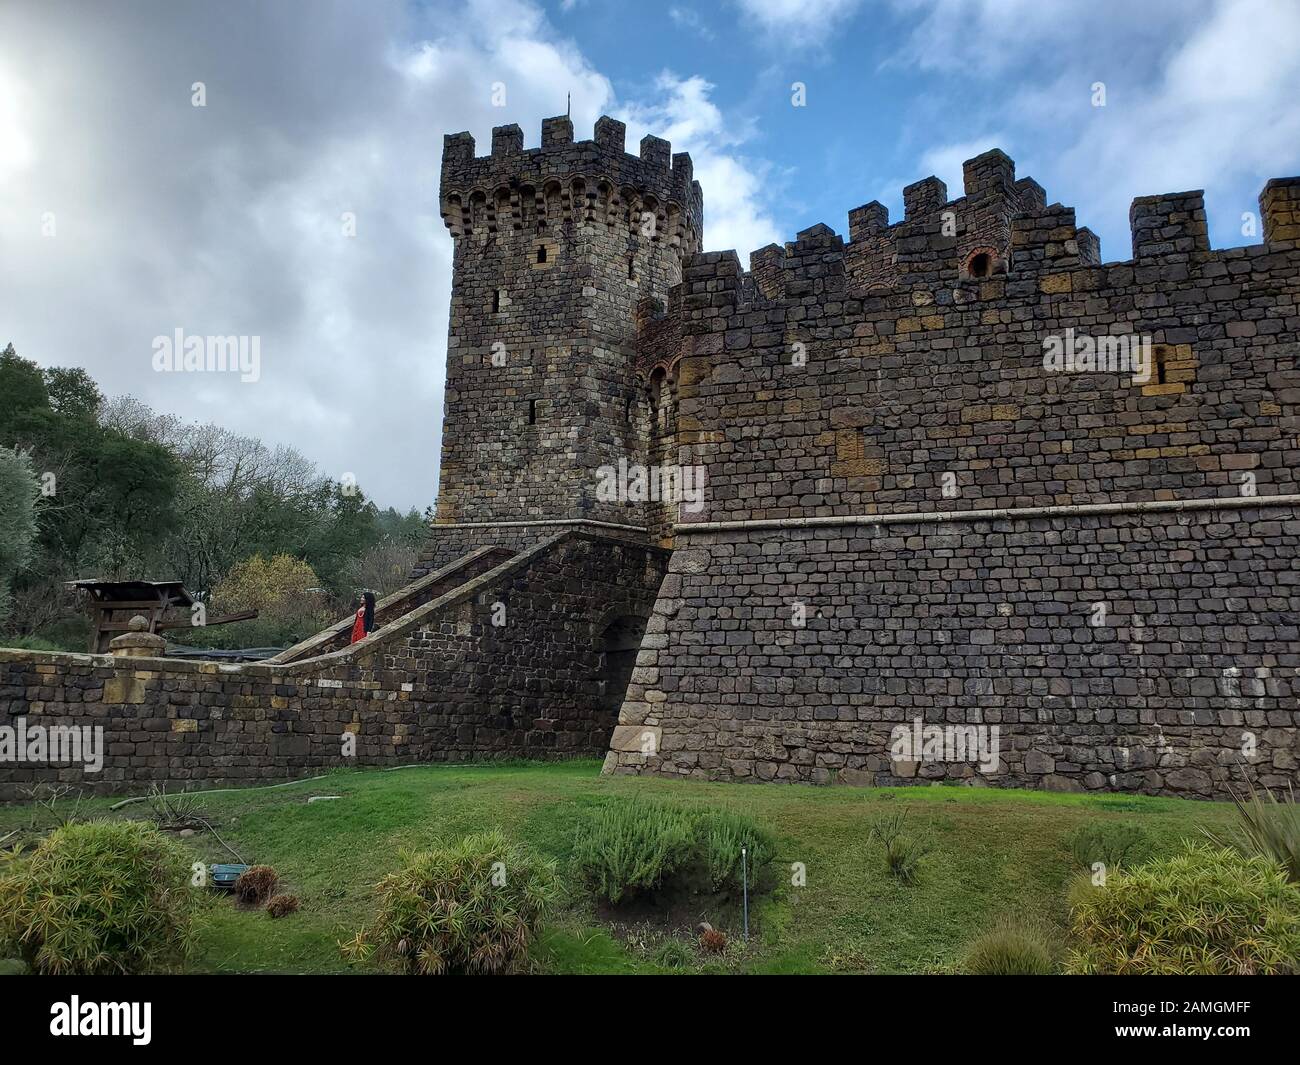 Walls and ramparts at Castello di Amorosa, a vineyard in the Calistoga AVA of the Napa Valley in the California Wine Country, housed in a large reconstruction of a Tuscan castle, Calistoga, California, December 22, 2019. Castello di Amorosa is a popular tourist destination for visitors to the Napa Valley. () Stock Photo